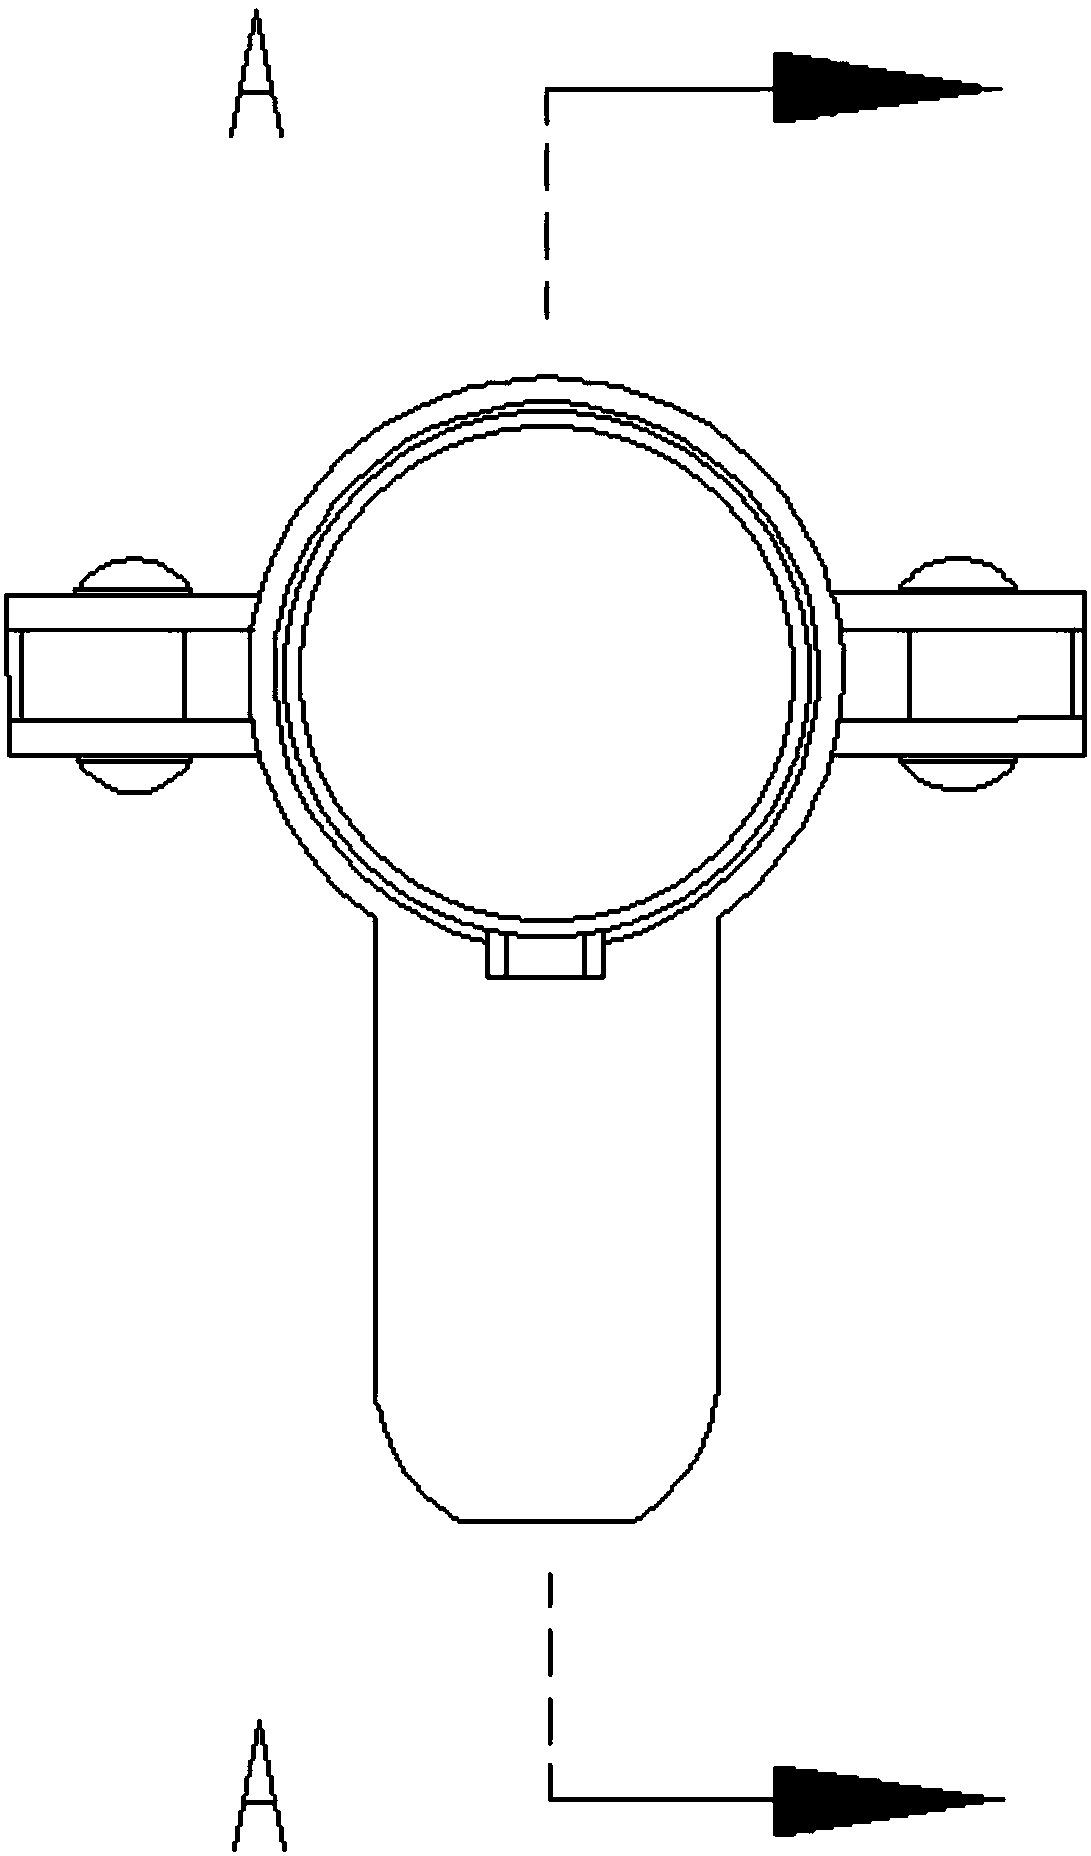 Lock body structure with function of double-cylinder synchronous control for unlocking